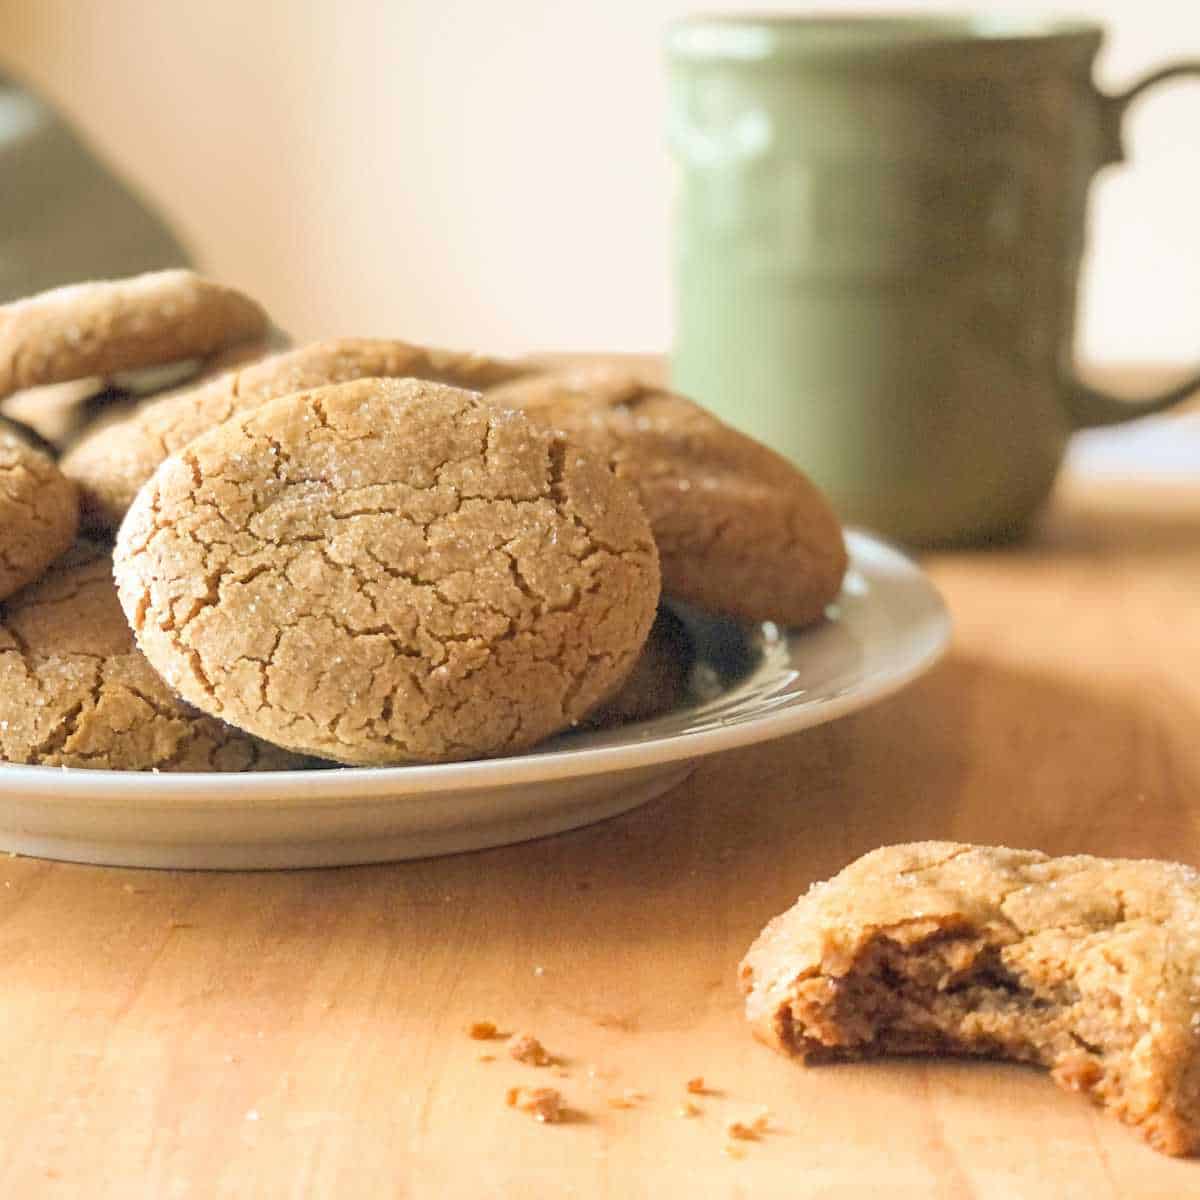 A plate of gluten free ginger cookies and one with a bite taken out of it.